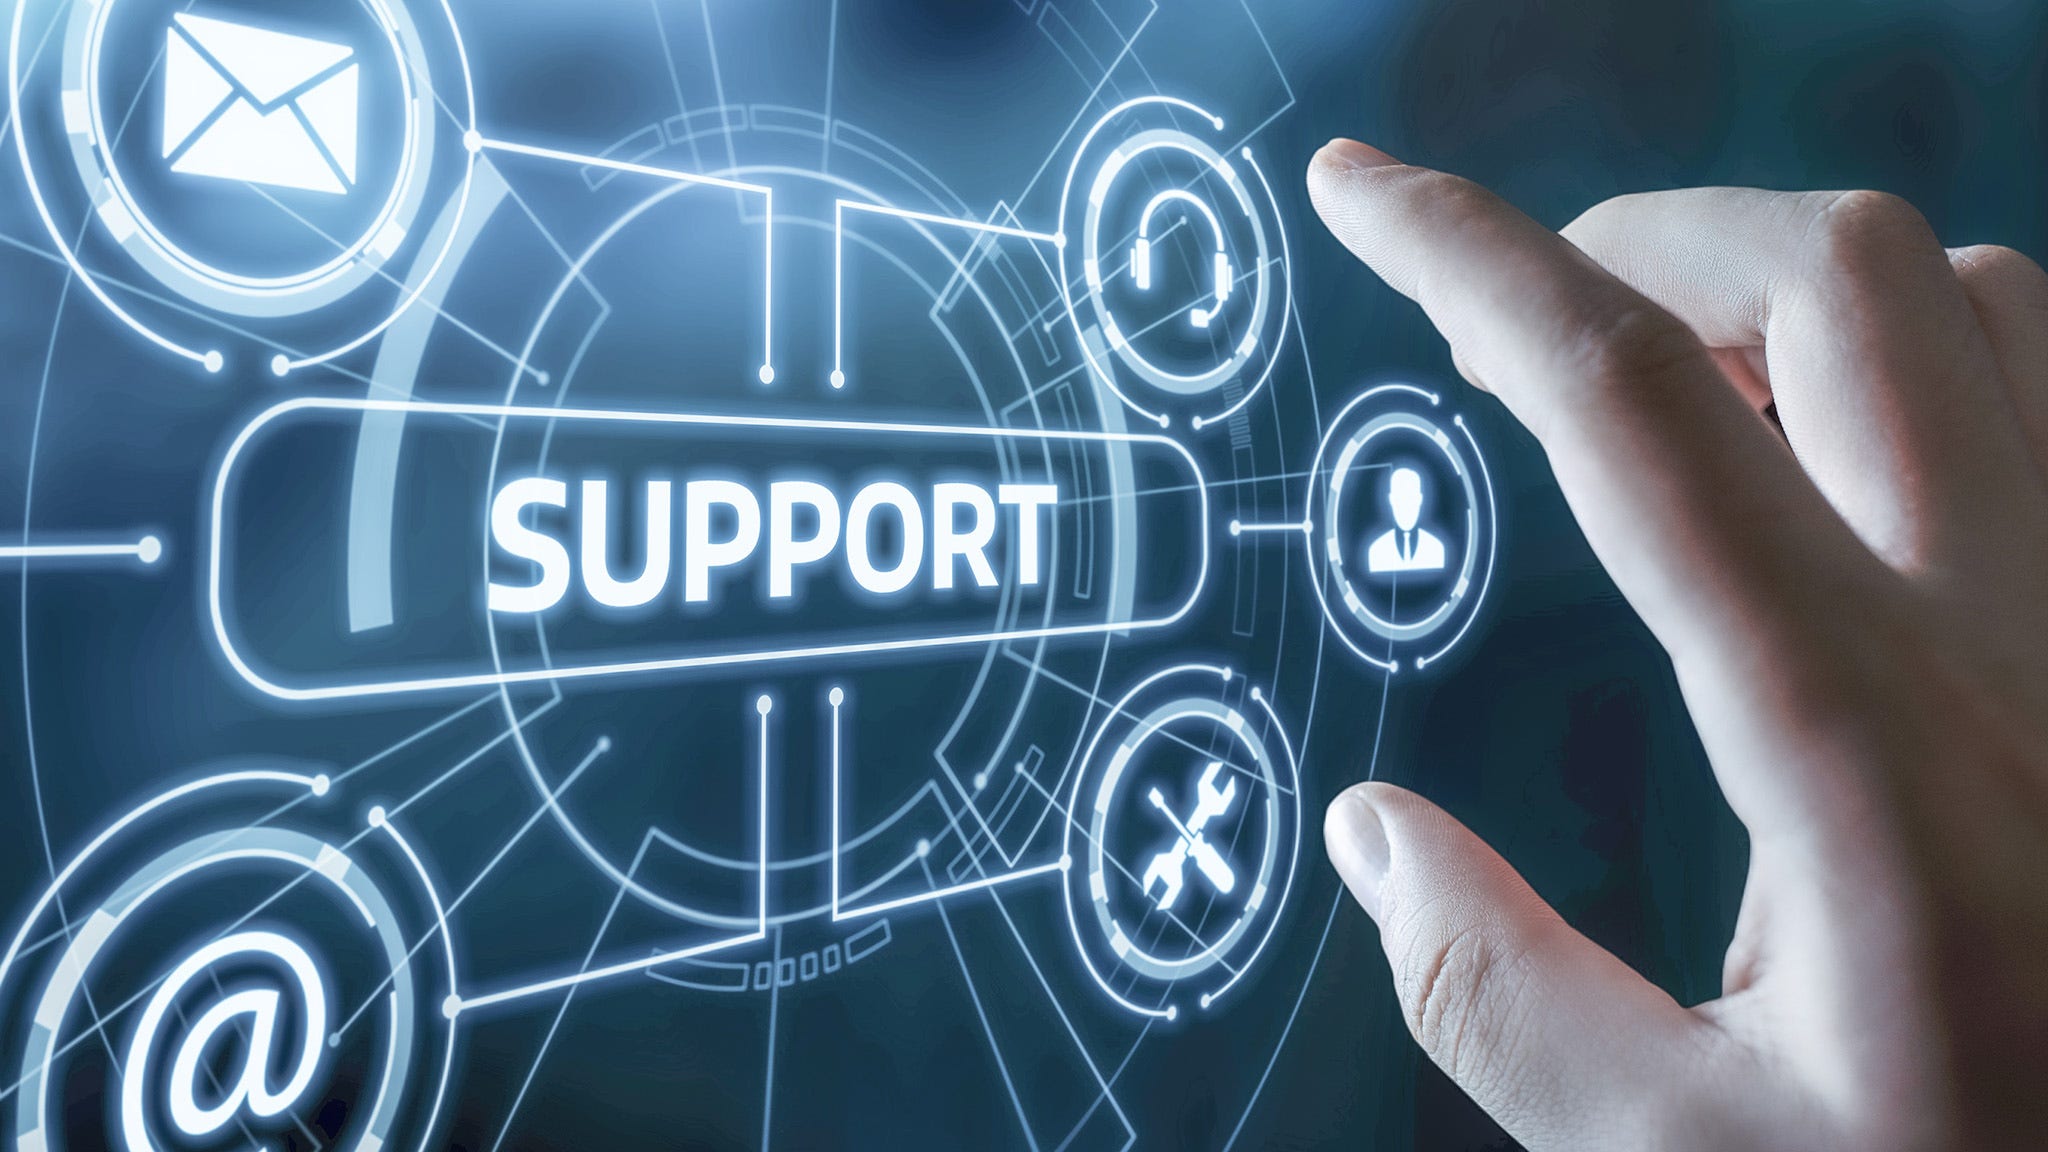 technical support images